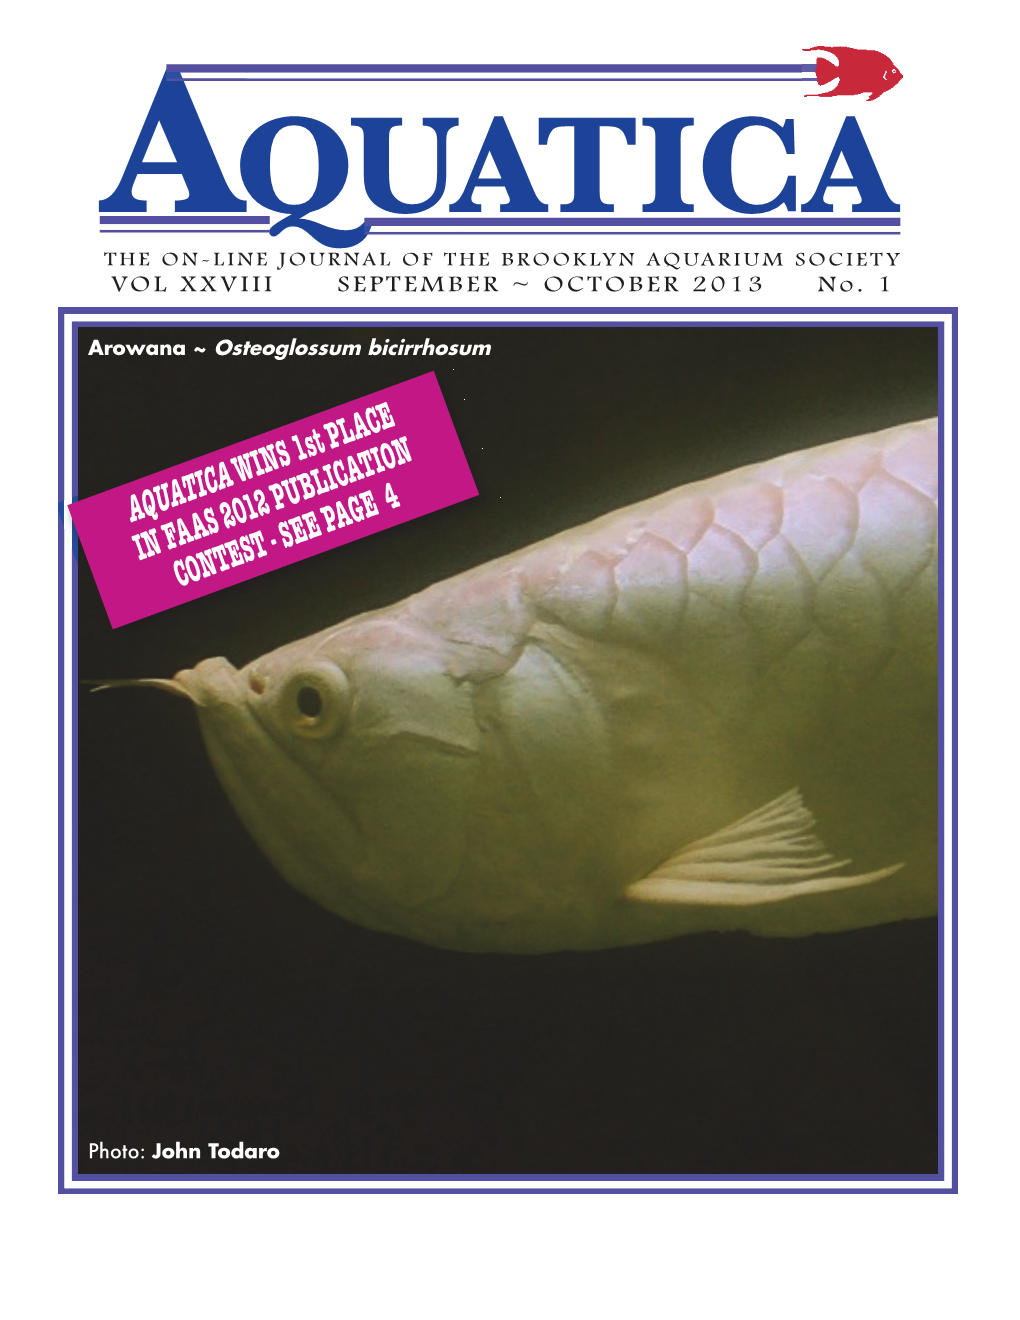 AQUATICAWINS 1St PLACE in FAAS 2012 PUBLICATION